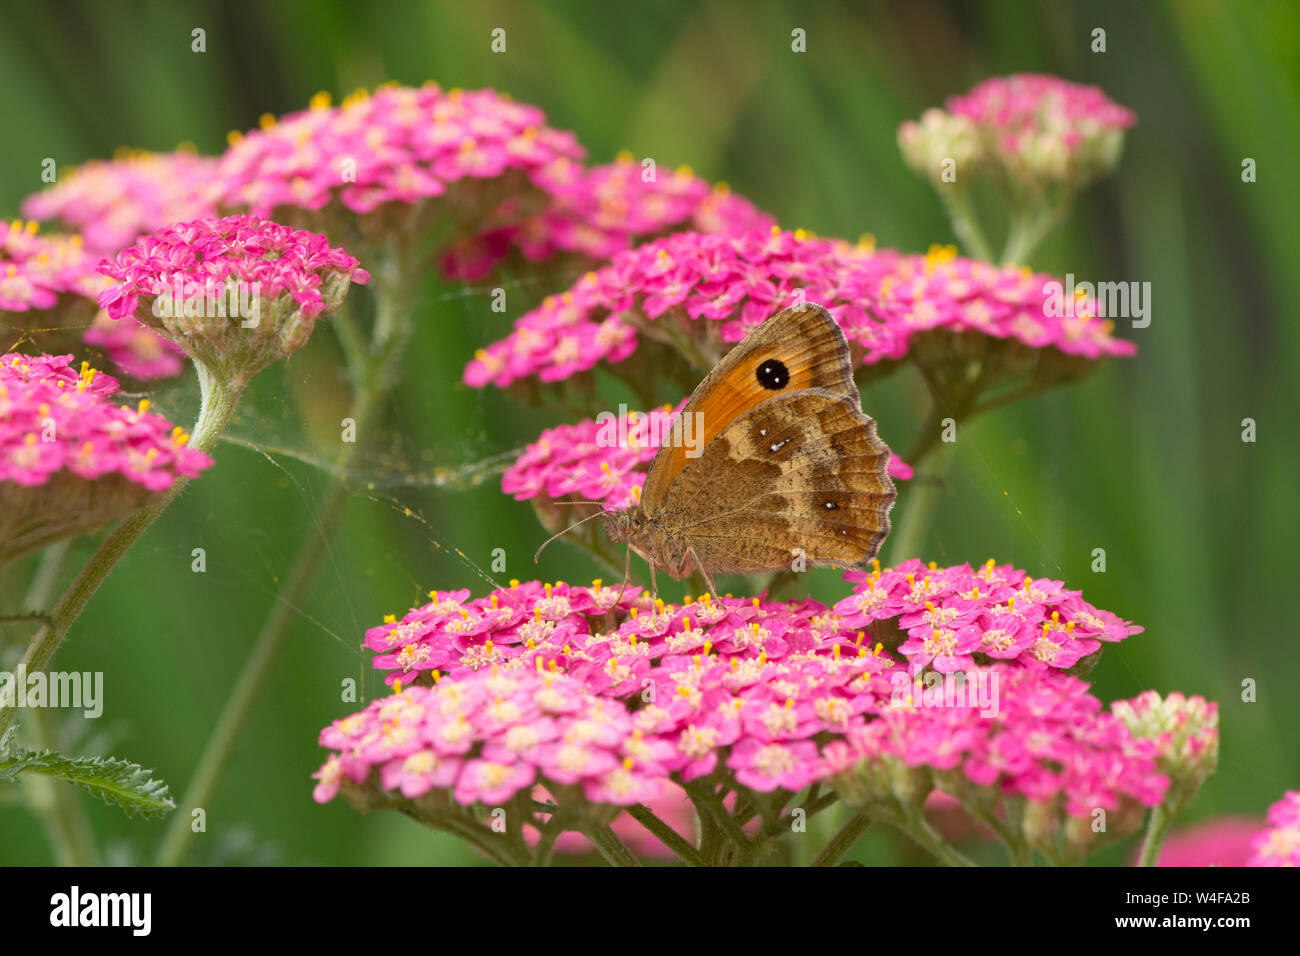 Gatekeeper or Hedge Brown, Pyronia tithonus, butterfly, on Achillea, July Stock Photo